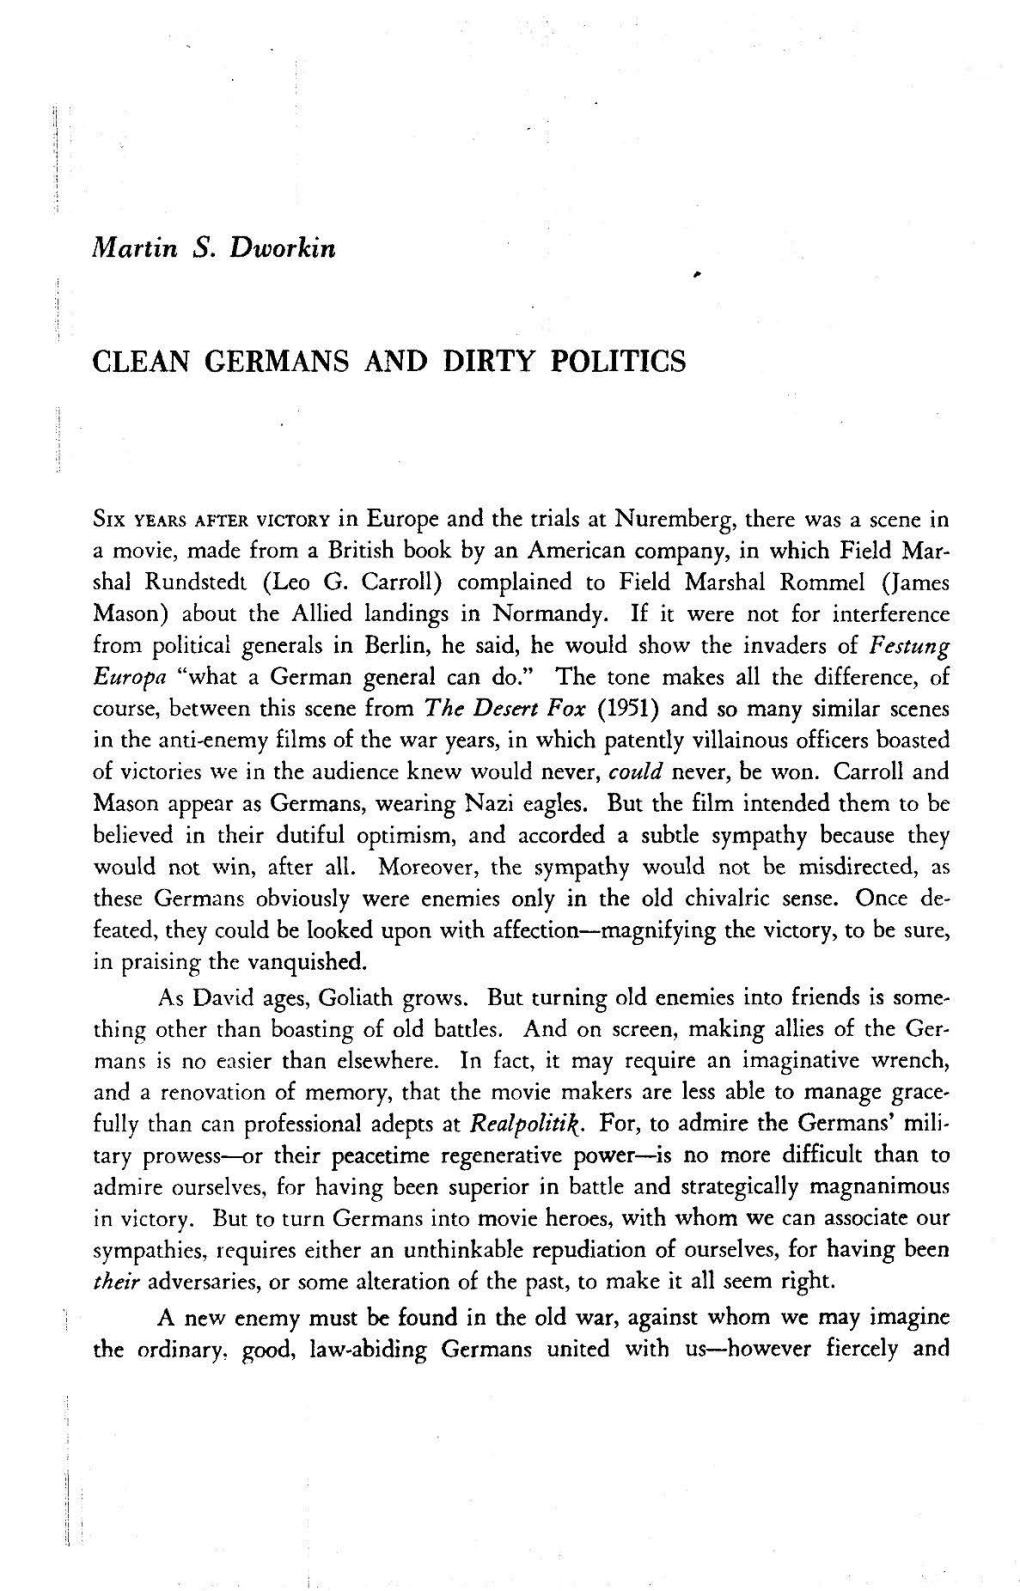 Martin S. Dworkin CLEAN GERMANS and DIRTY POLITICS